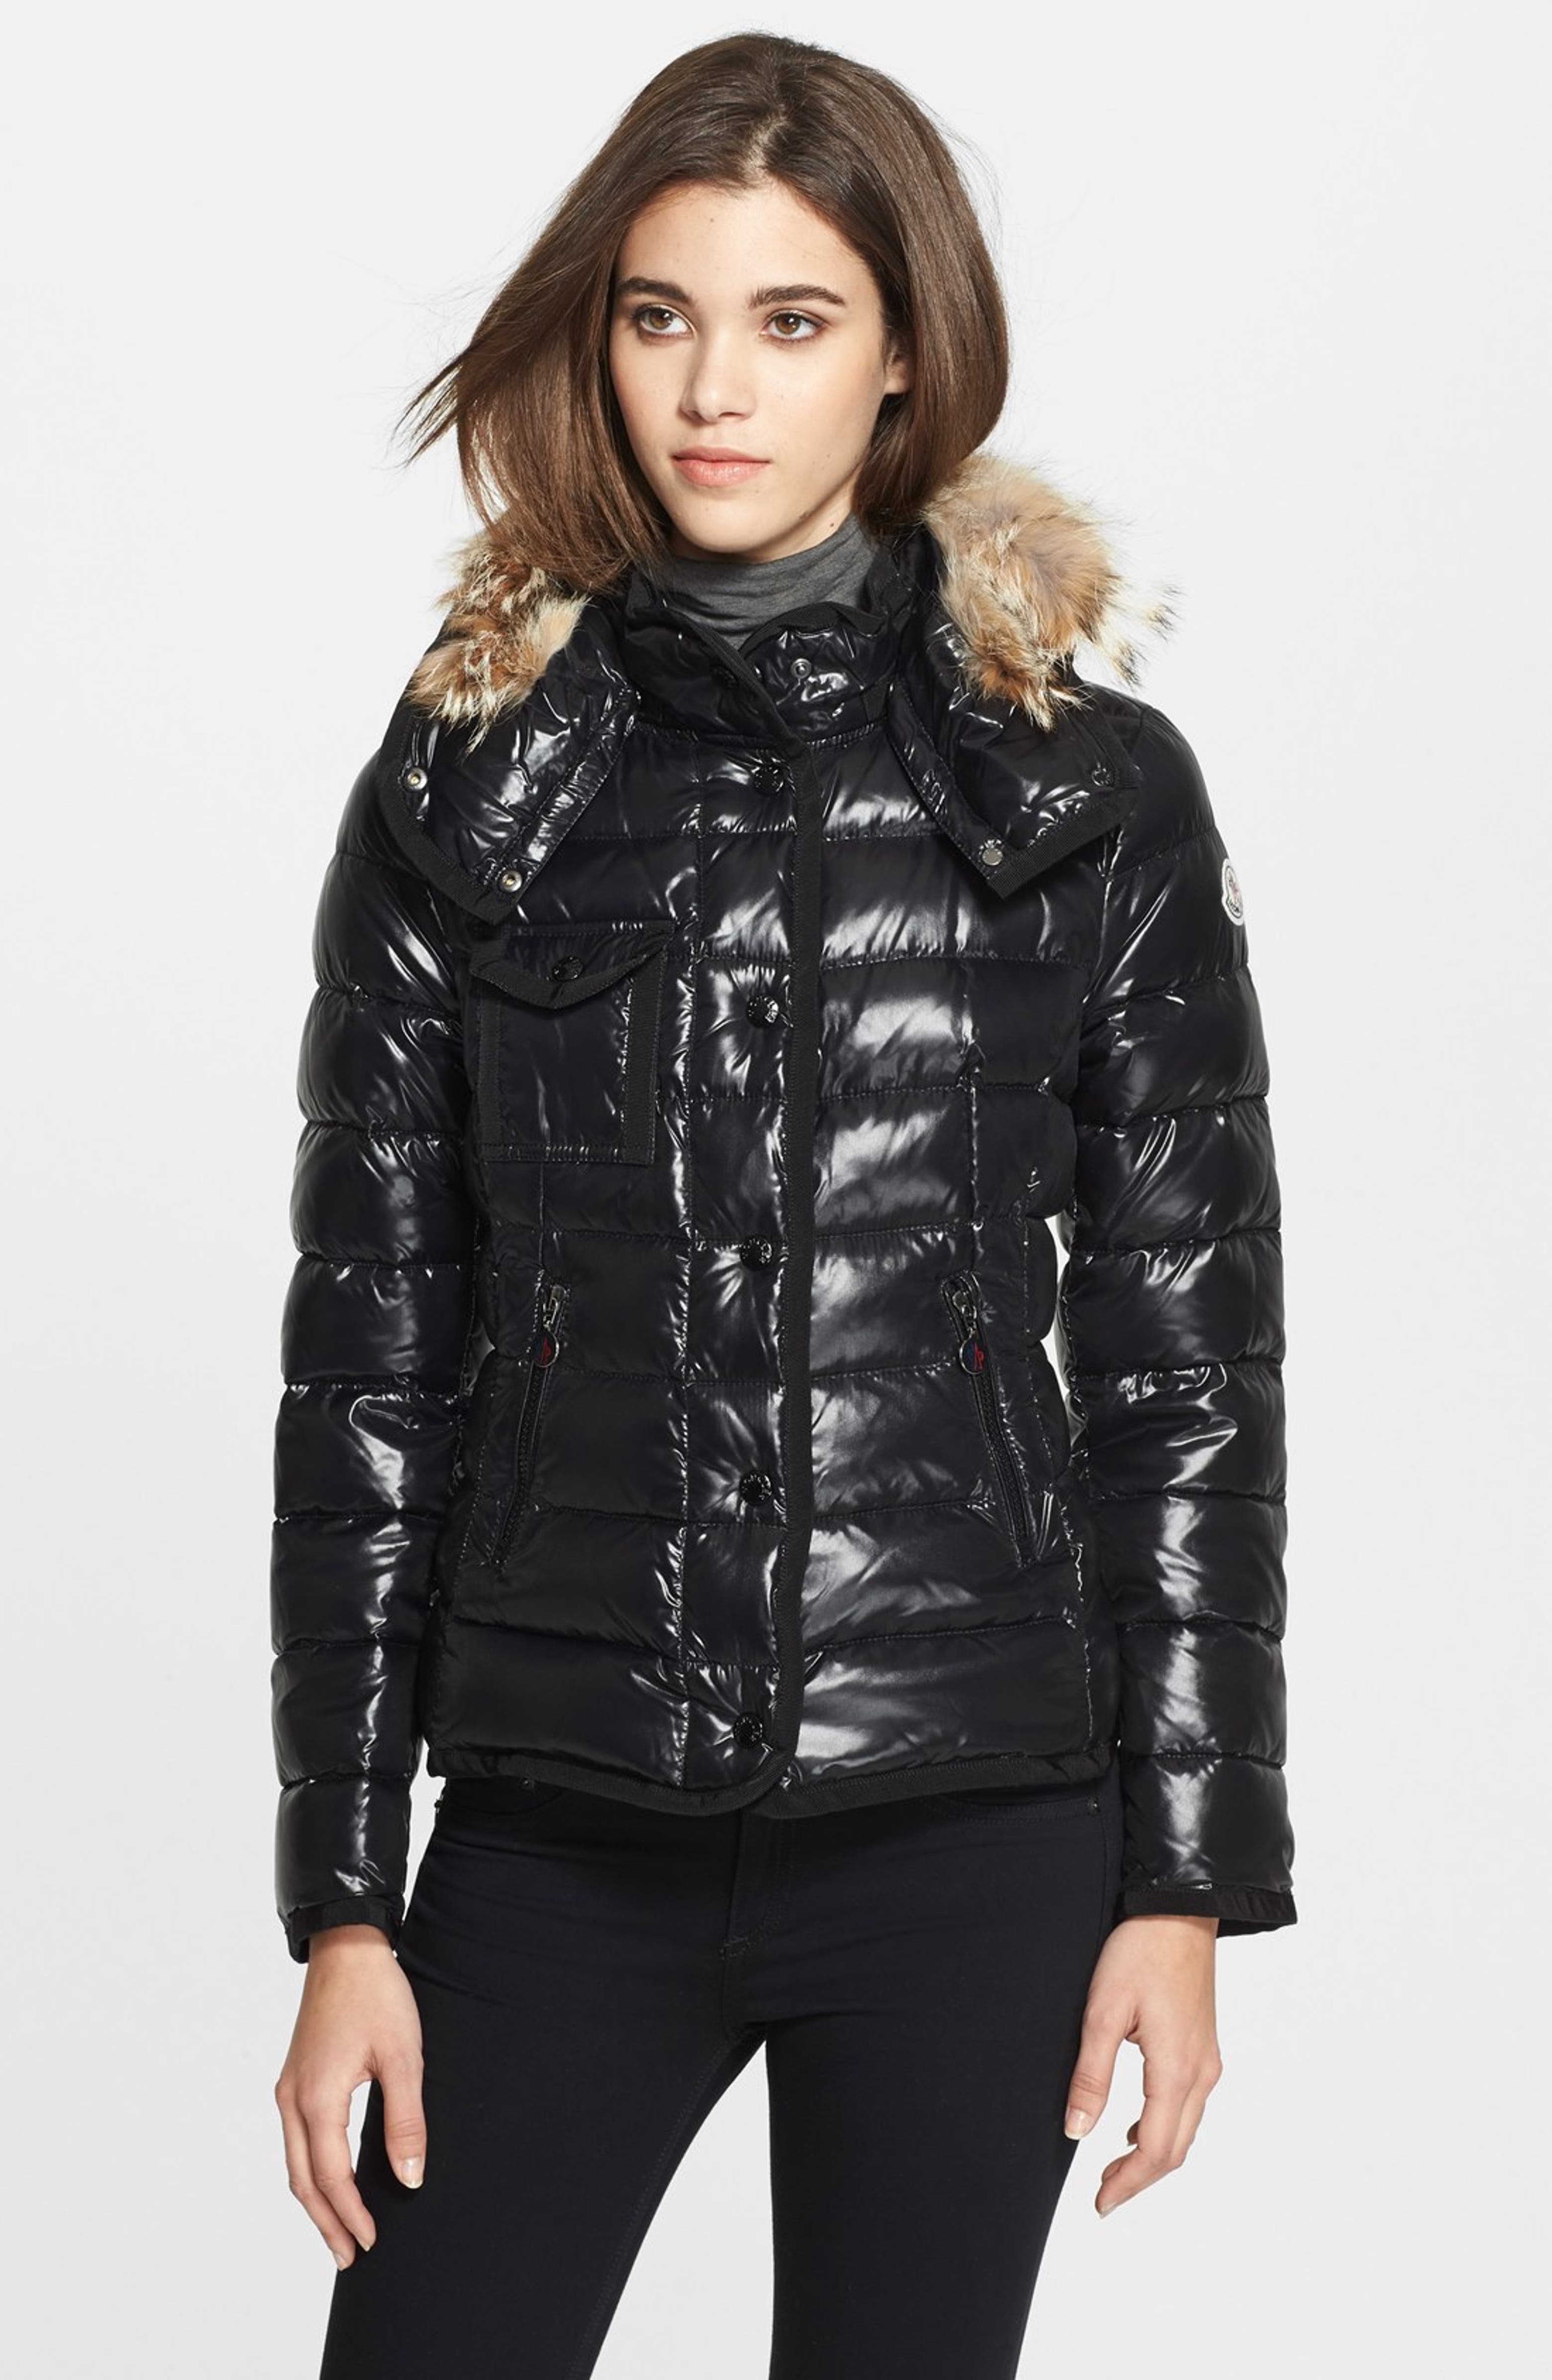 Moncler 'Armco' Genuine Coyote Fur Trim Goose Down Jacket with ...